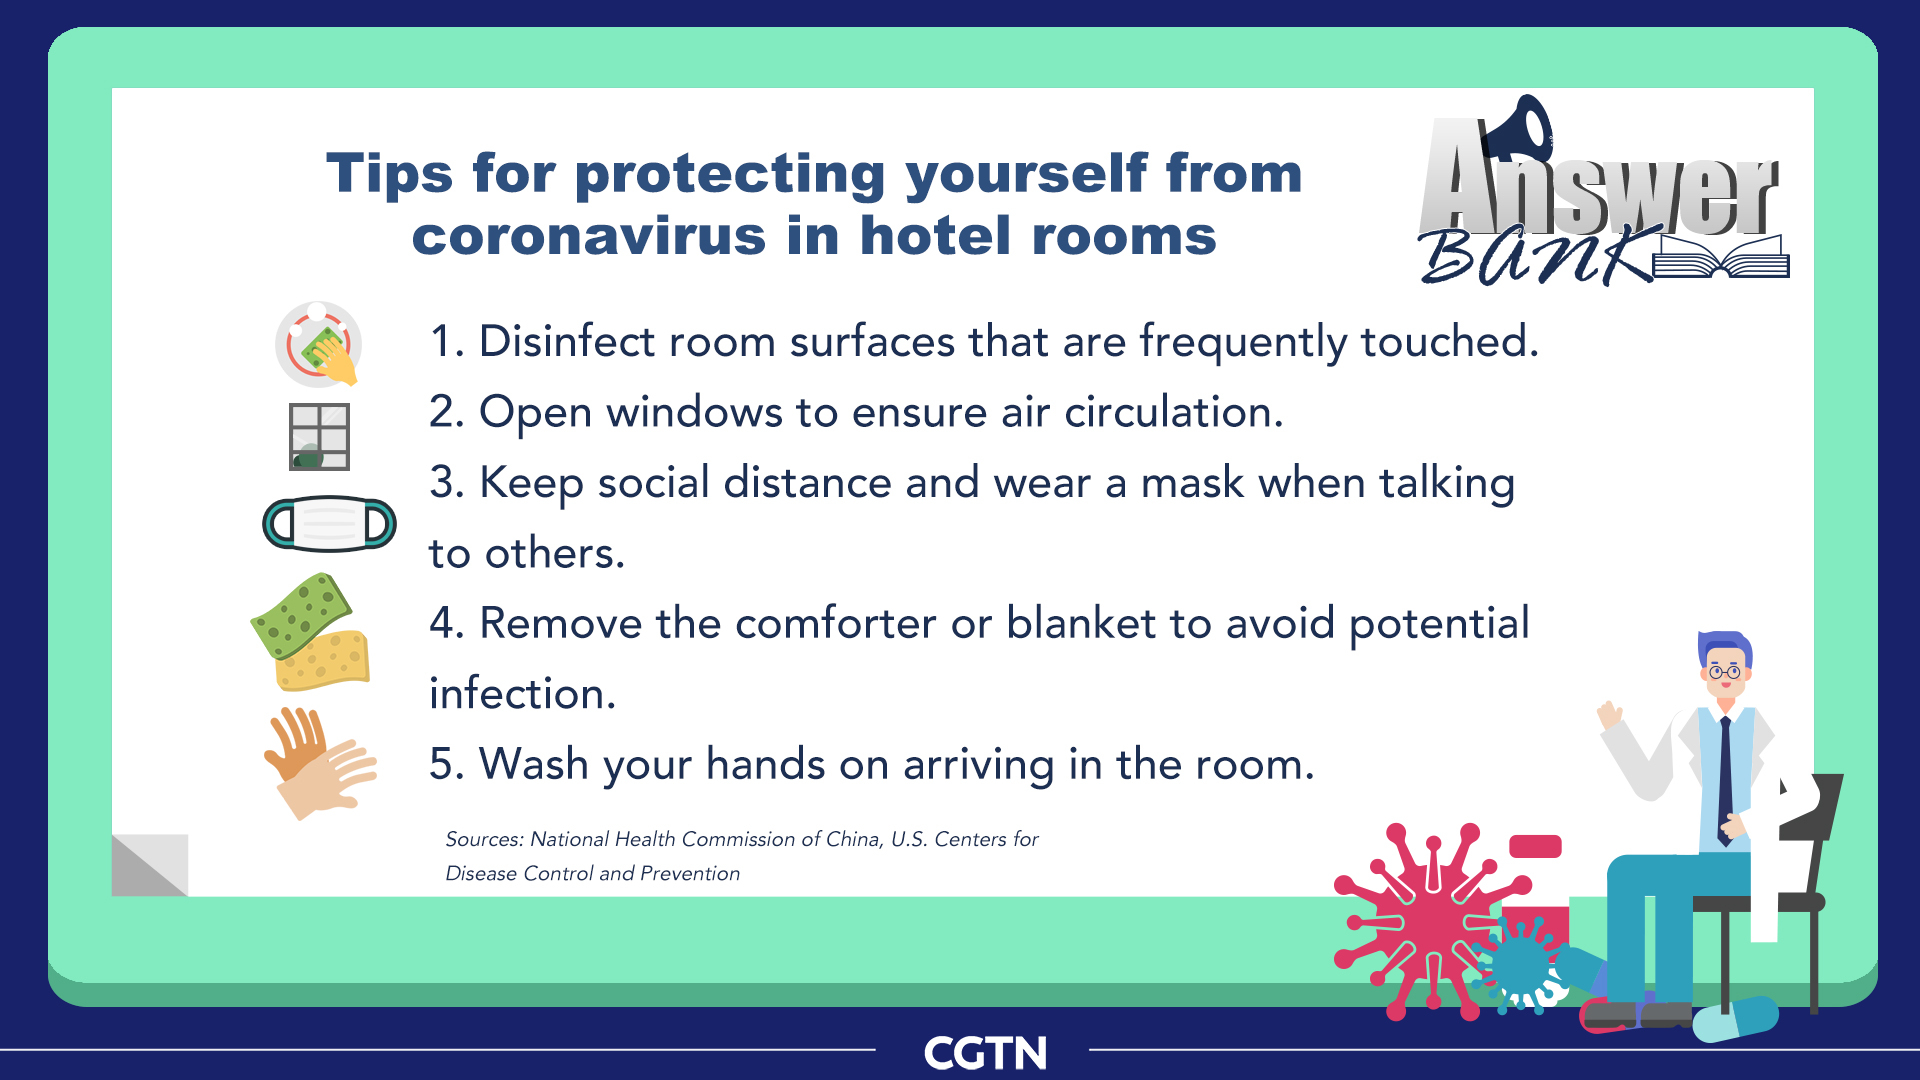 Answer Bank: Tips for protecting yourself from COVID-26 in hotels